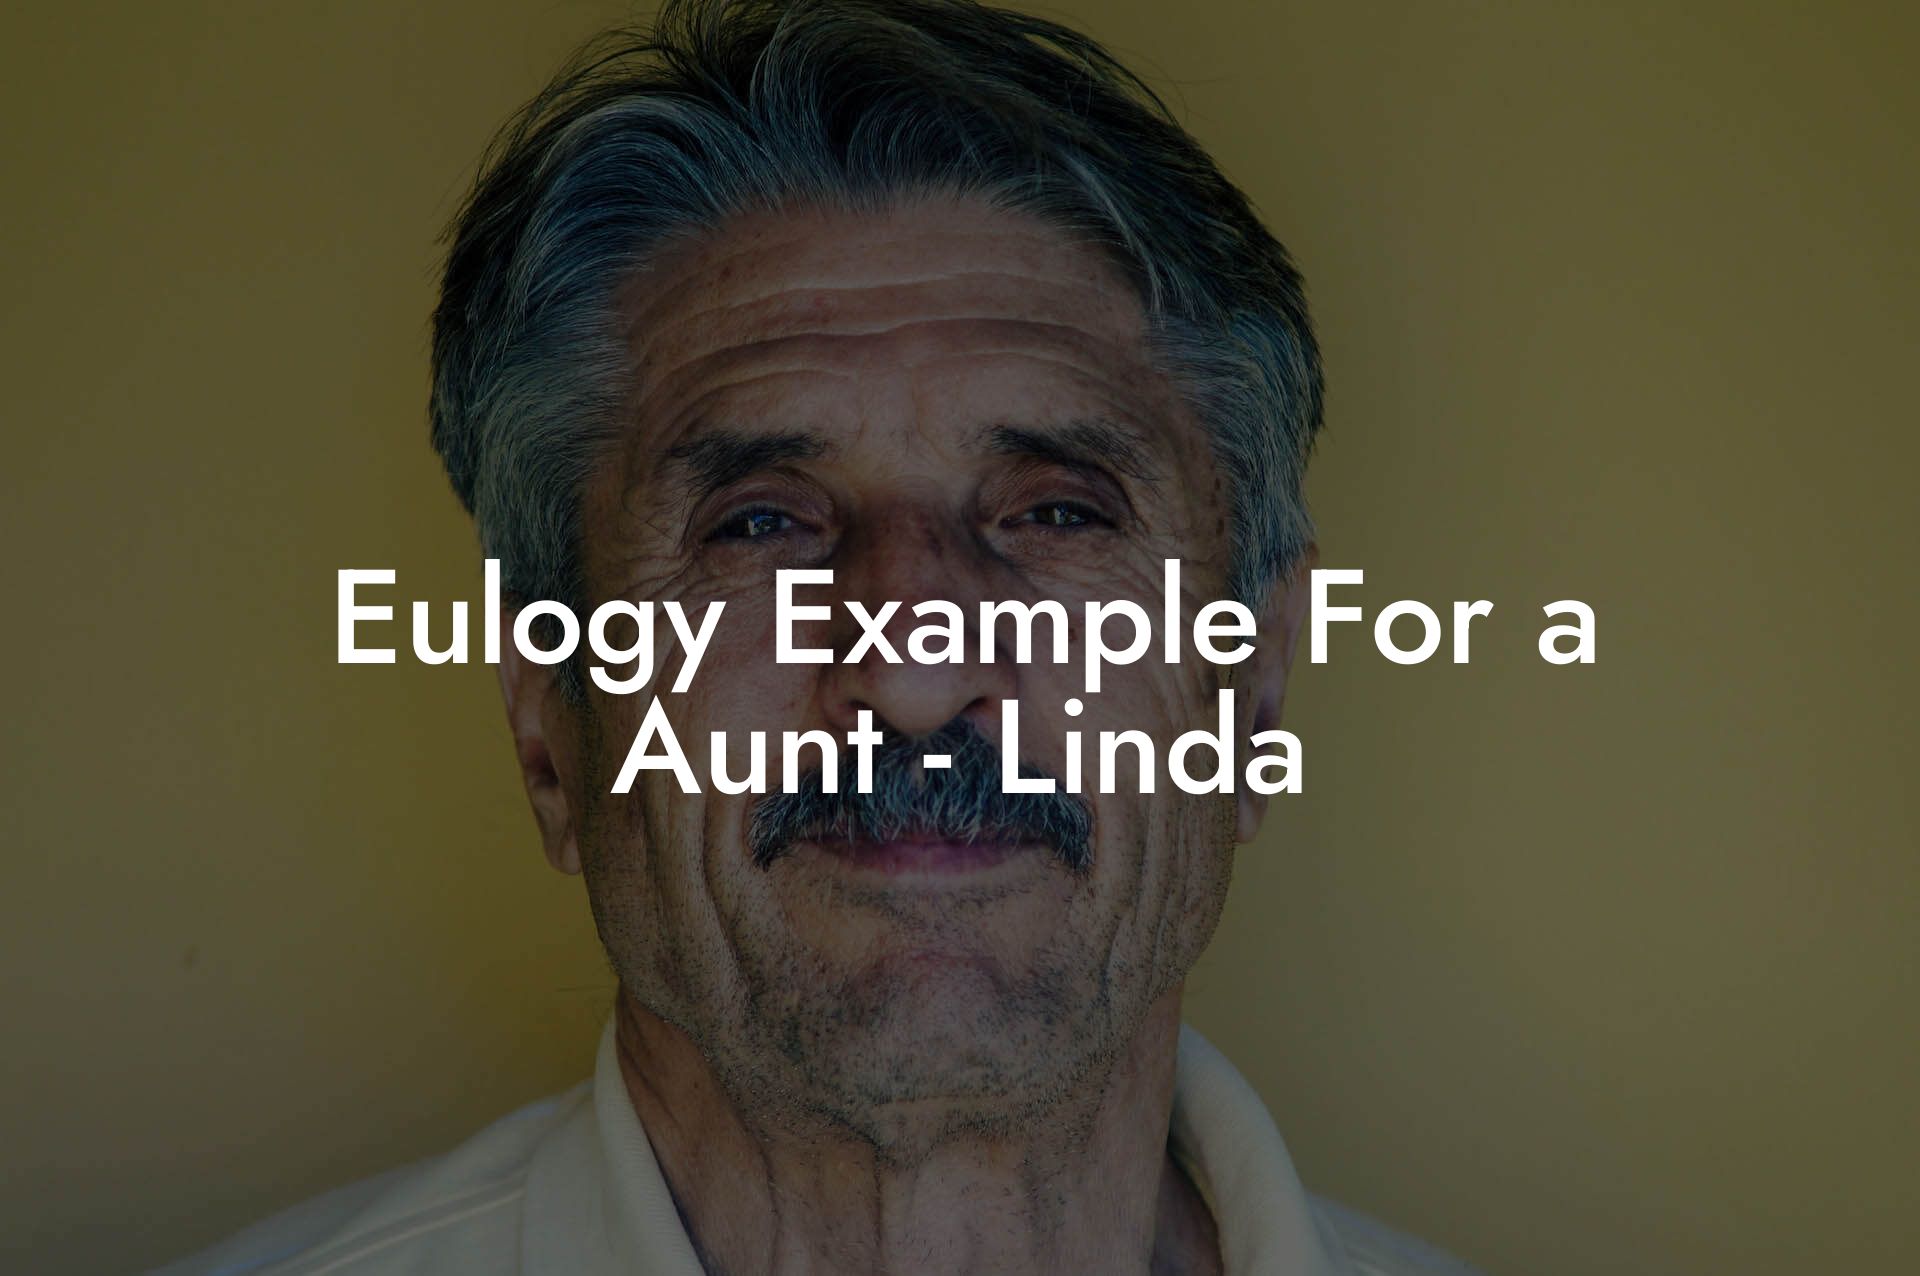 Eulogy Example For a Aunt - Linda